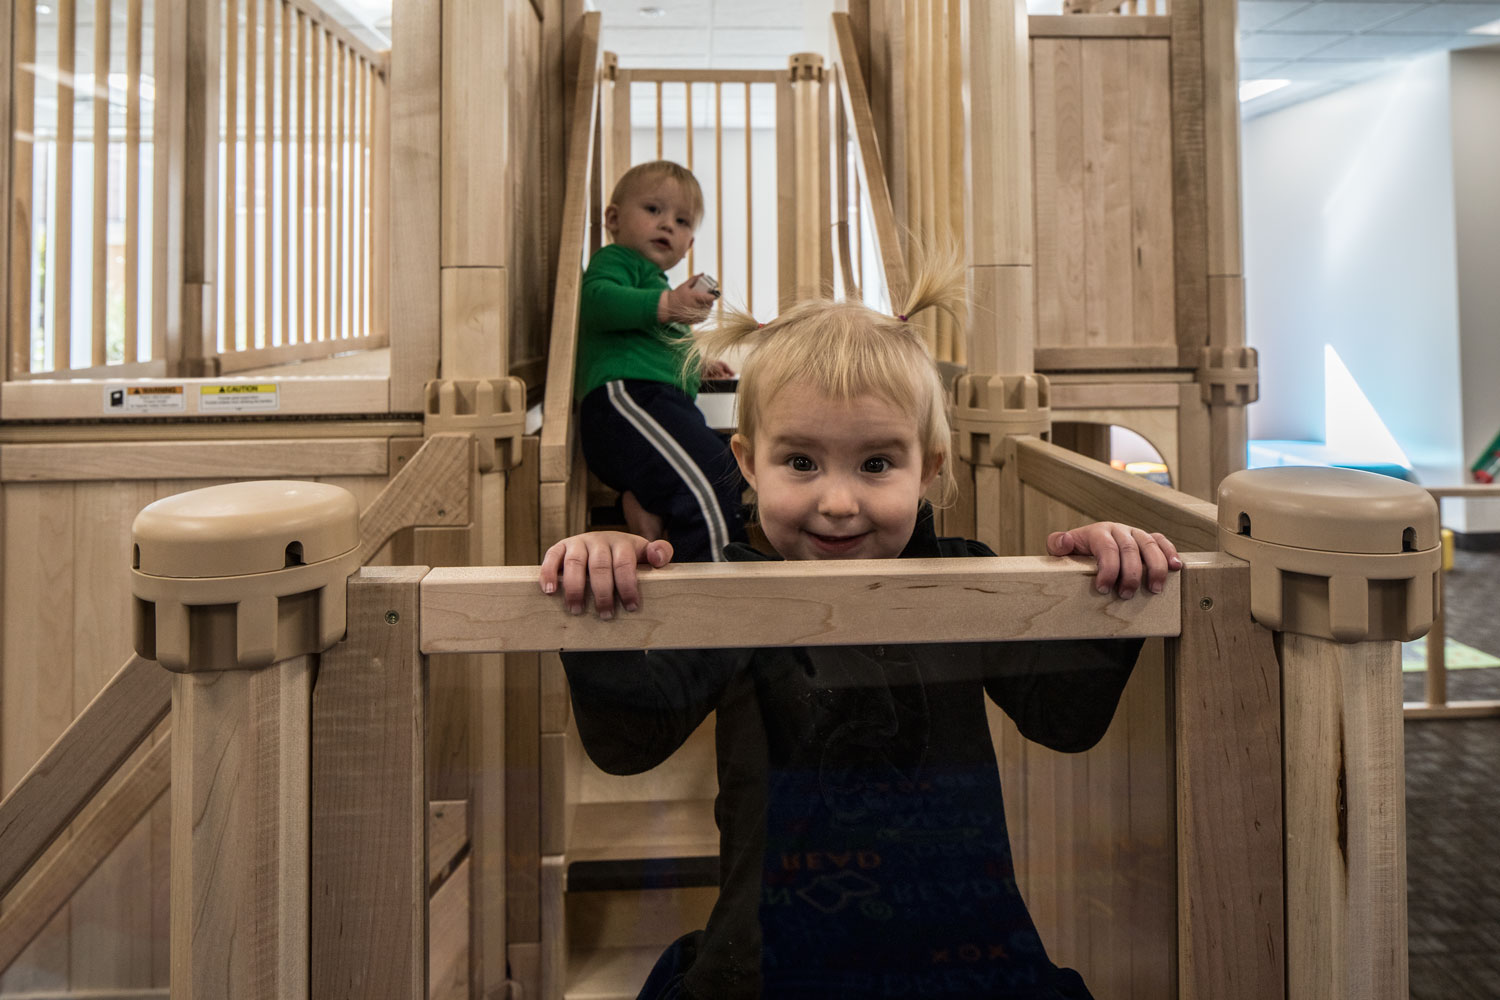 A tot with pigtails looks over the play structure railing and smiles at the camera in the new BYU family study room